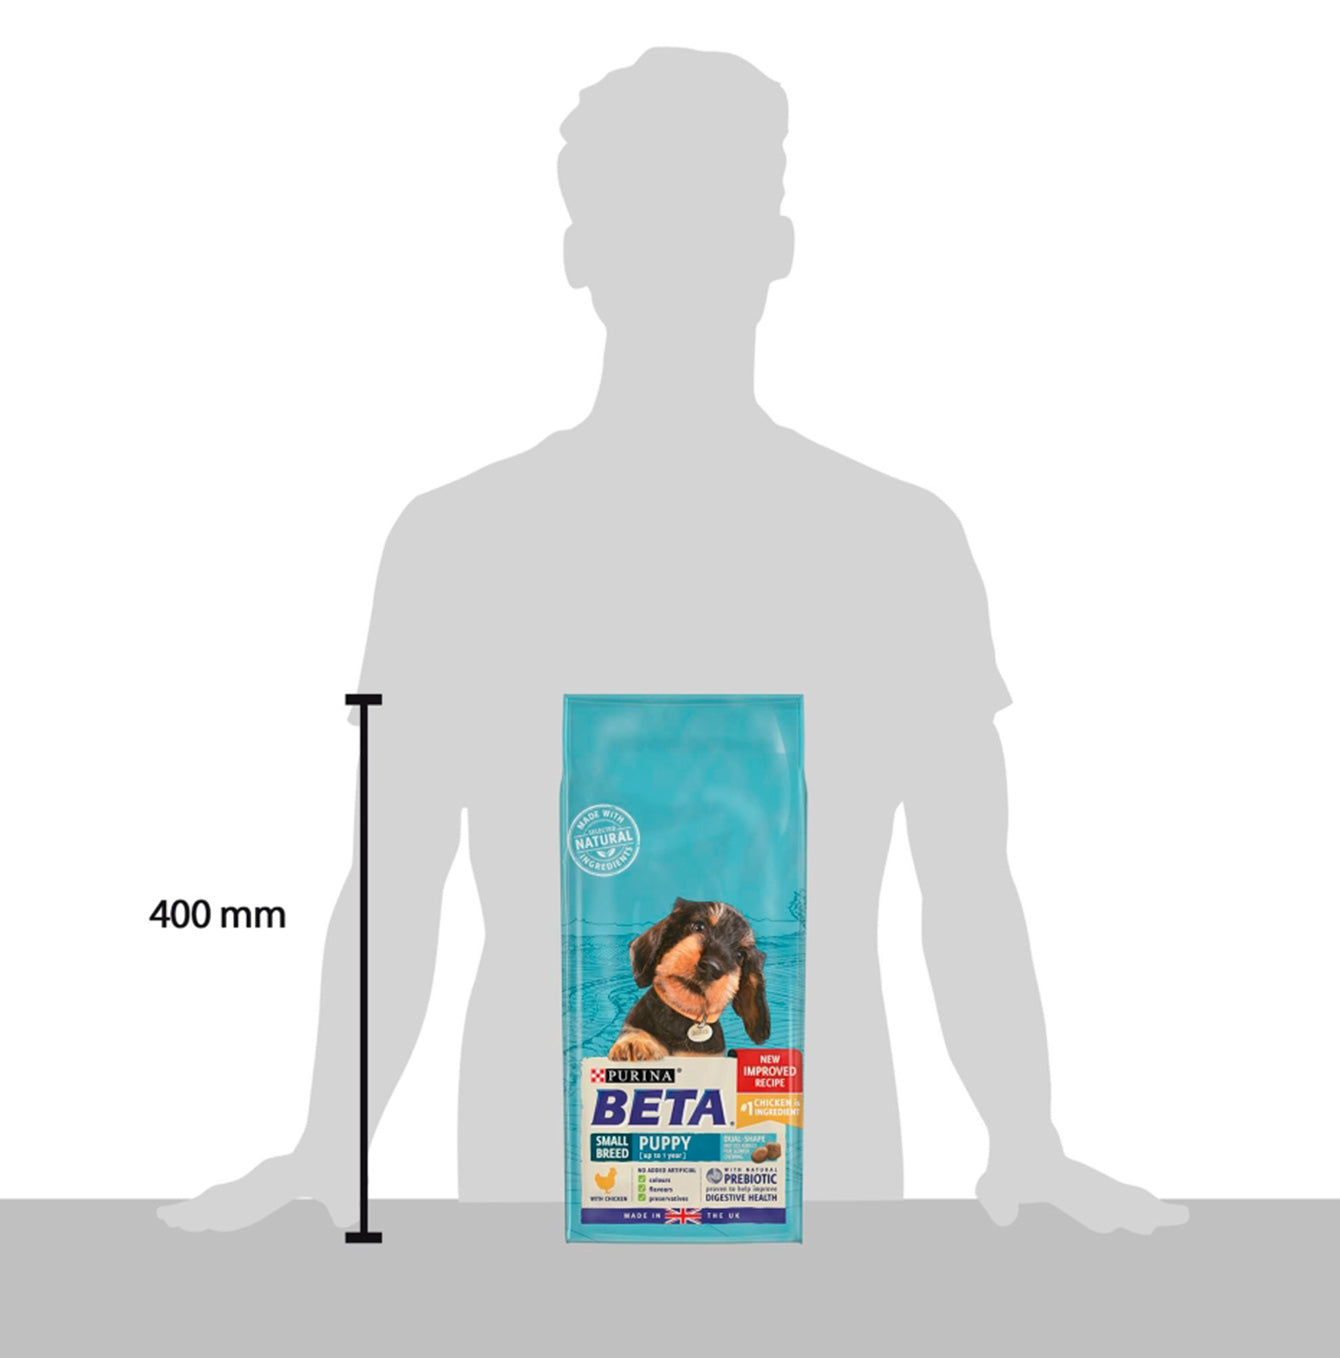 Purina beta puppy small breed chicken 2kg size guide